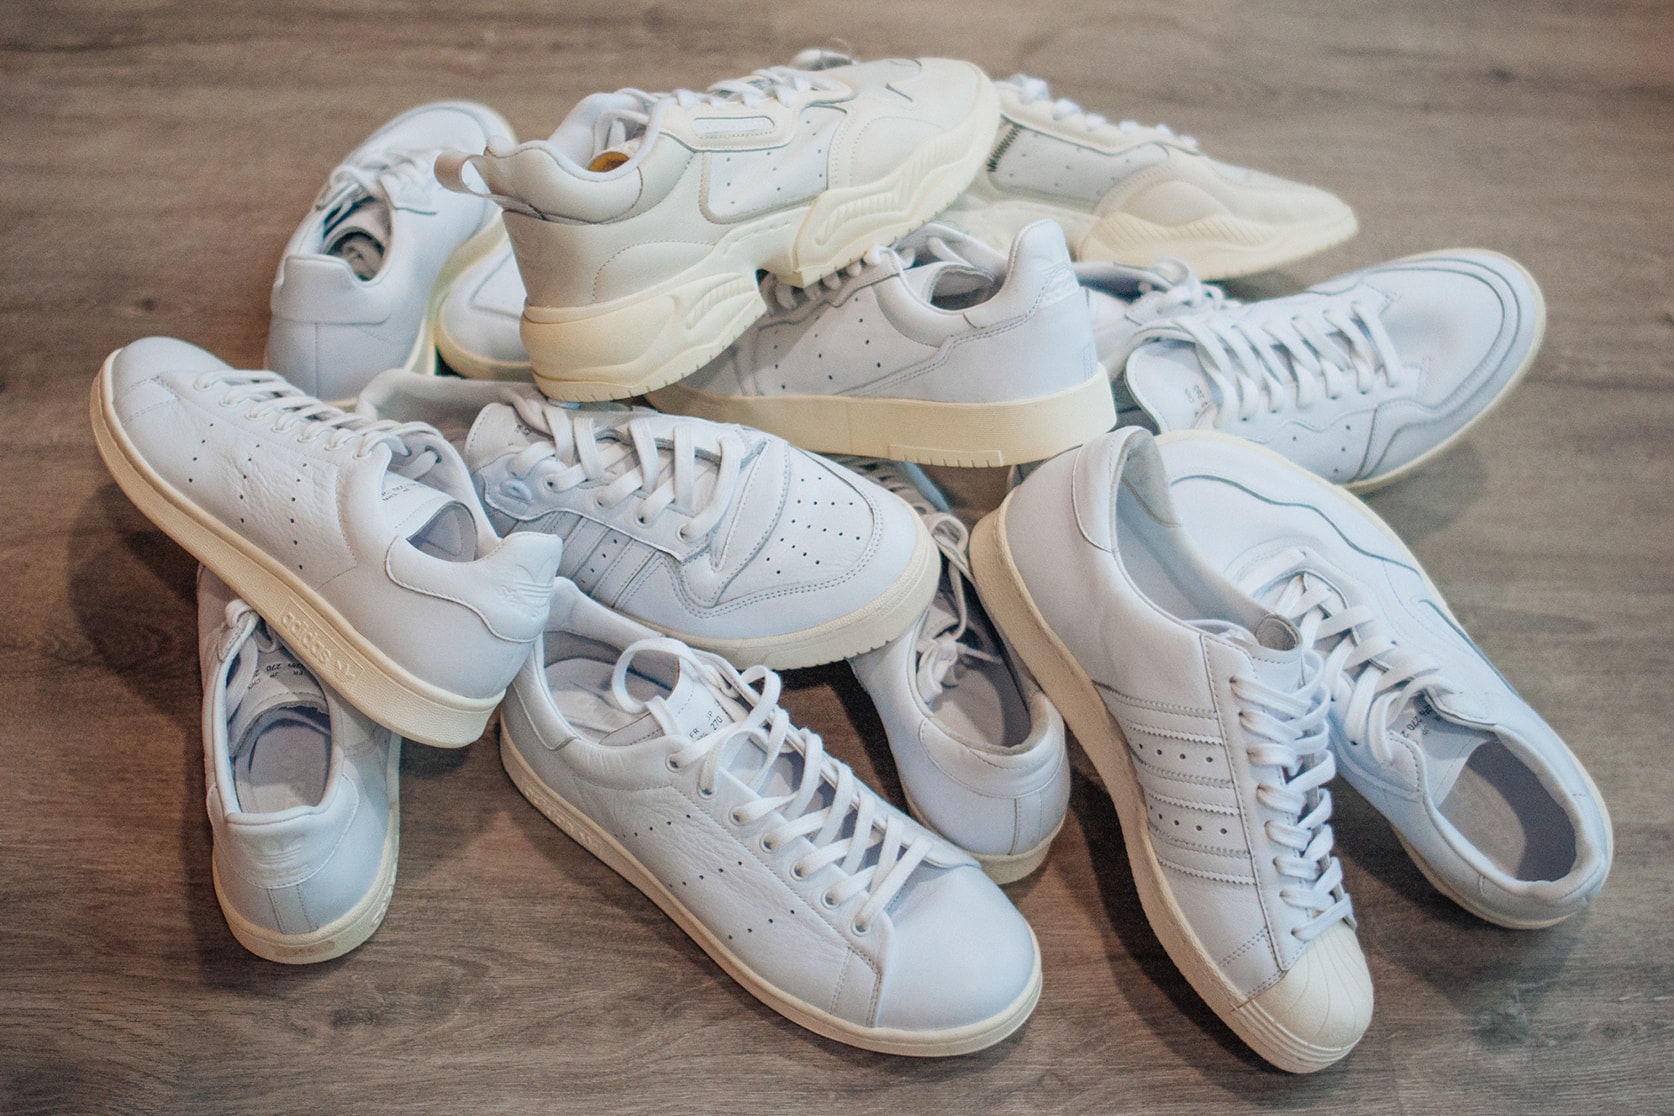 adidas originals all white sneakers trainers footwear shoes home of classics pack paris Stan Smith Superstar 80s Continental 80 Torsion Comp SC Premiere AR Trainer Nizza Rivalry Supercourt RX